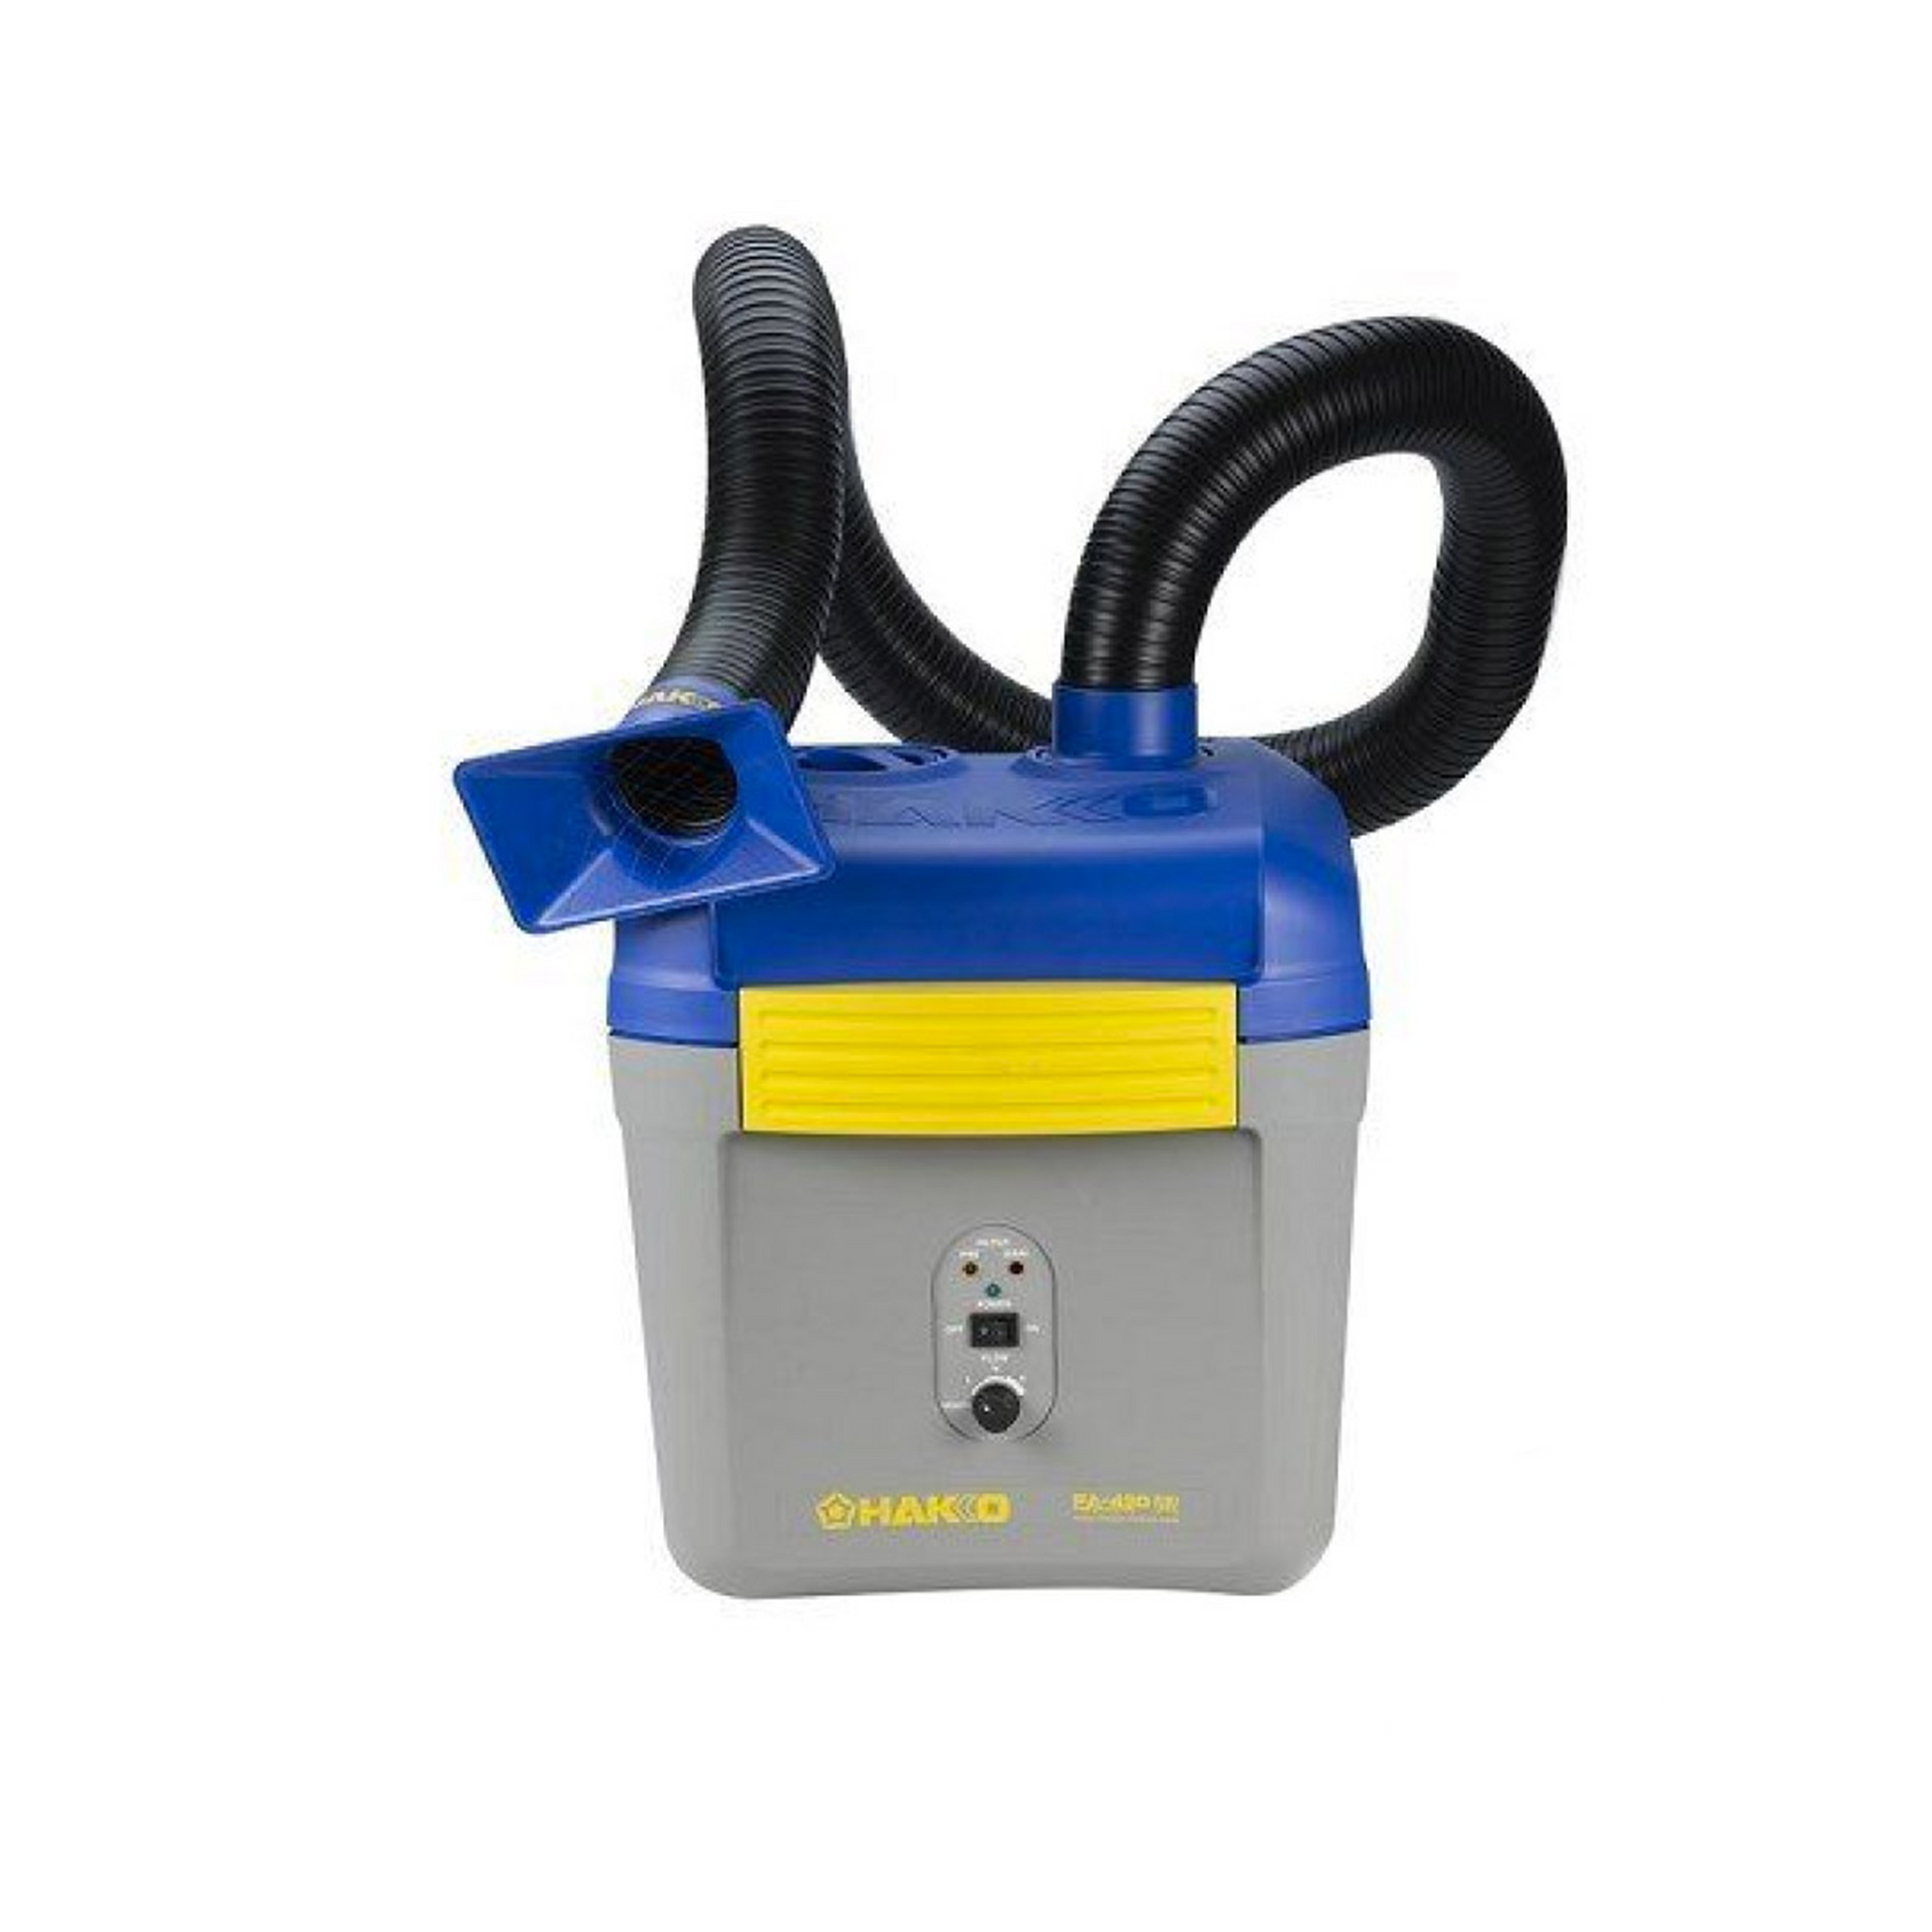 Hakko FA-430 Fume Extraction System HEPA filter 99% Smoke Absorber Air Filteration System